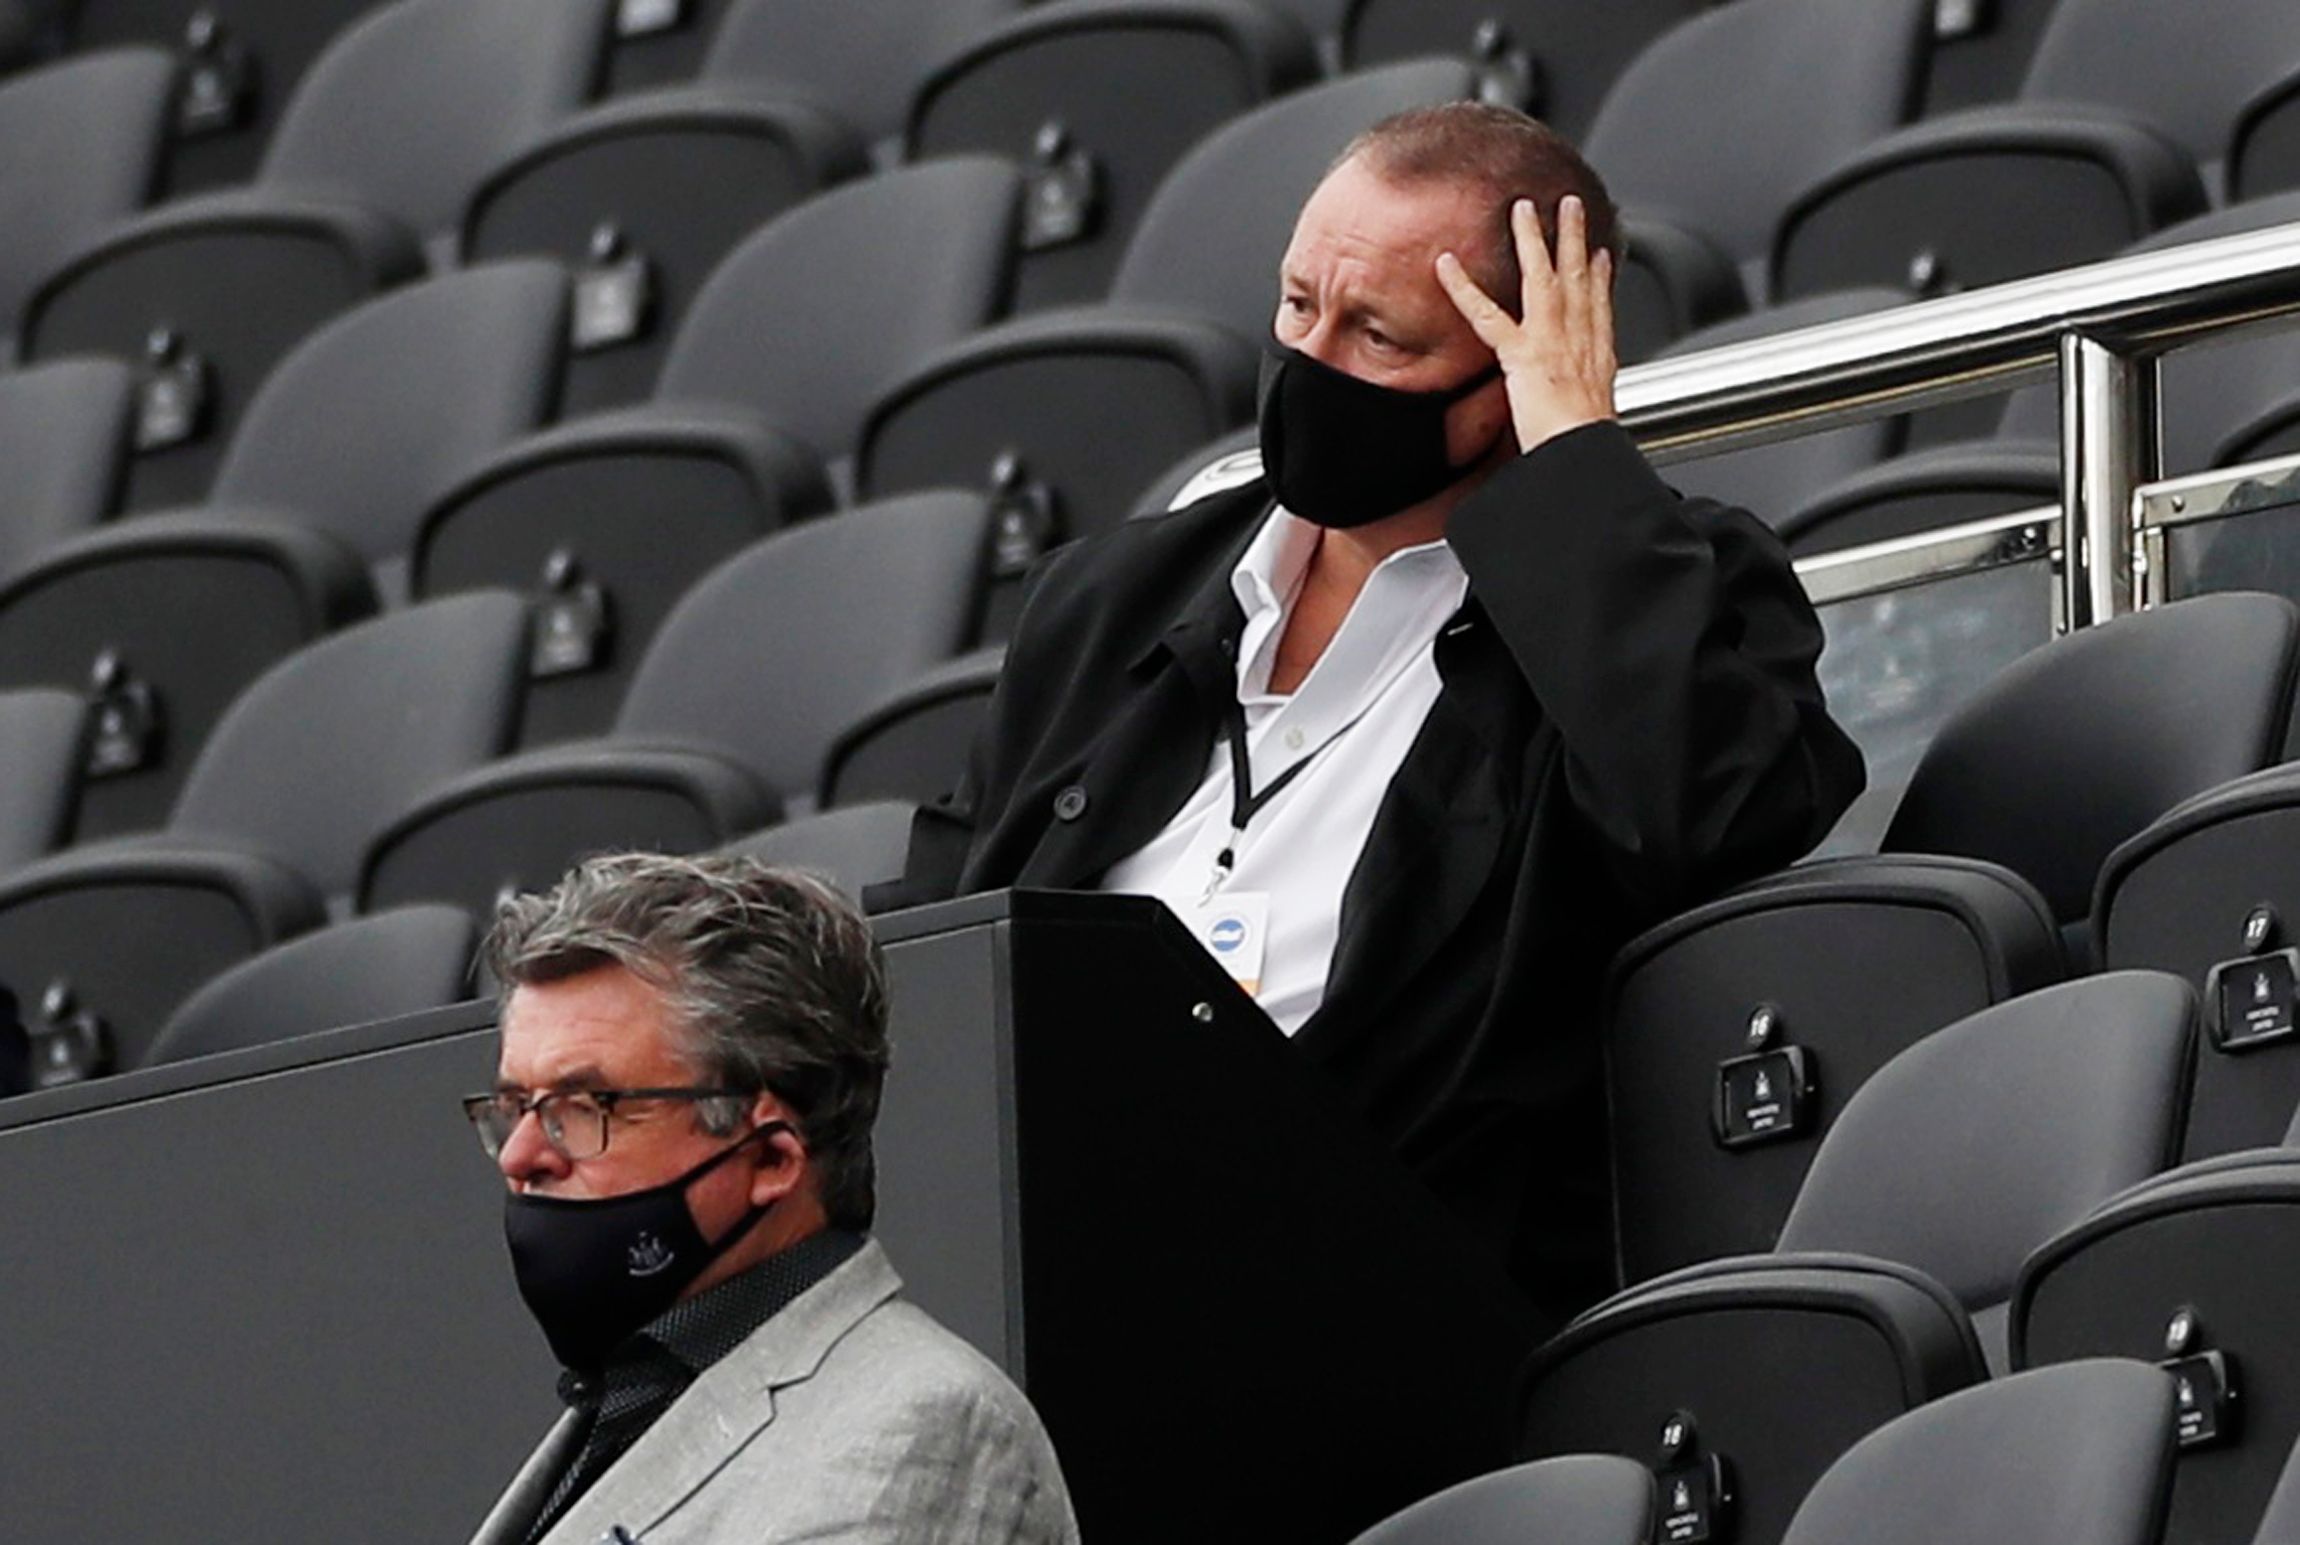 Soccer Football - Premier League - Newcastle United v Brighton &amp; Hove Albion - St James' Park, Newcastle, Britain - September 20, 2020 Newcastle United owner Mike Ashley wearing a protective face mask in the stands Pool via REUTERS/Lee Smith EDITORIAL USE ONLY. No use with unauthorized audio, video, data, fixture lists, club/league logos or 'live' services. Online in-match use limited to 75 images, no video emulation. No use in betting, games or single club/league/player publications.  Pleas